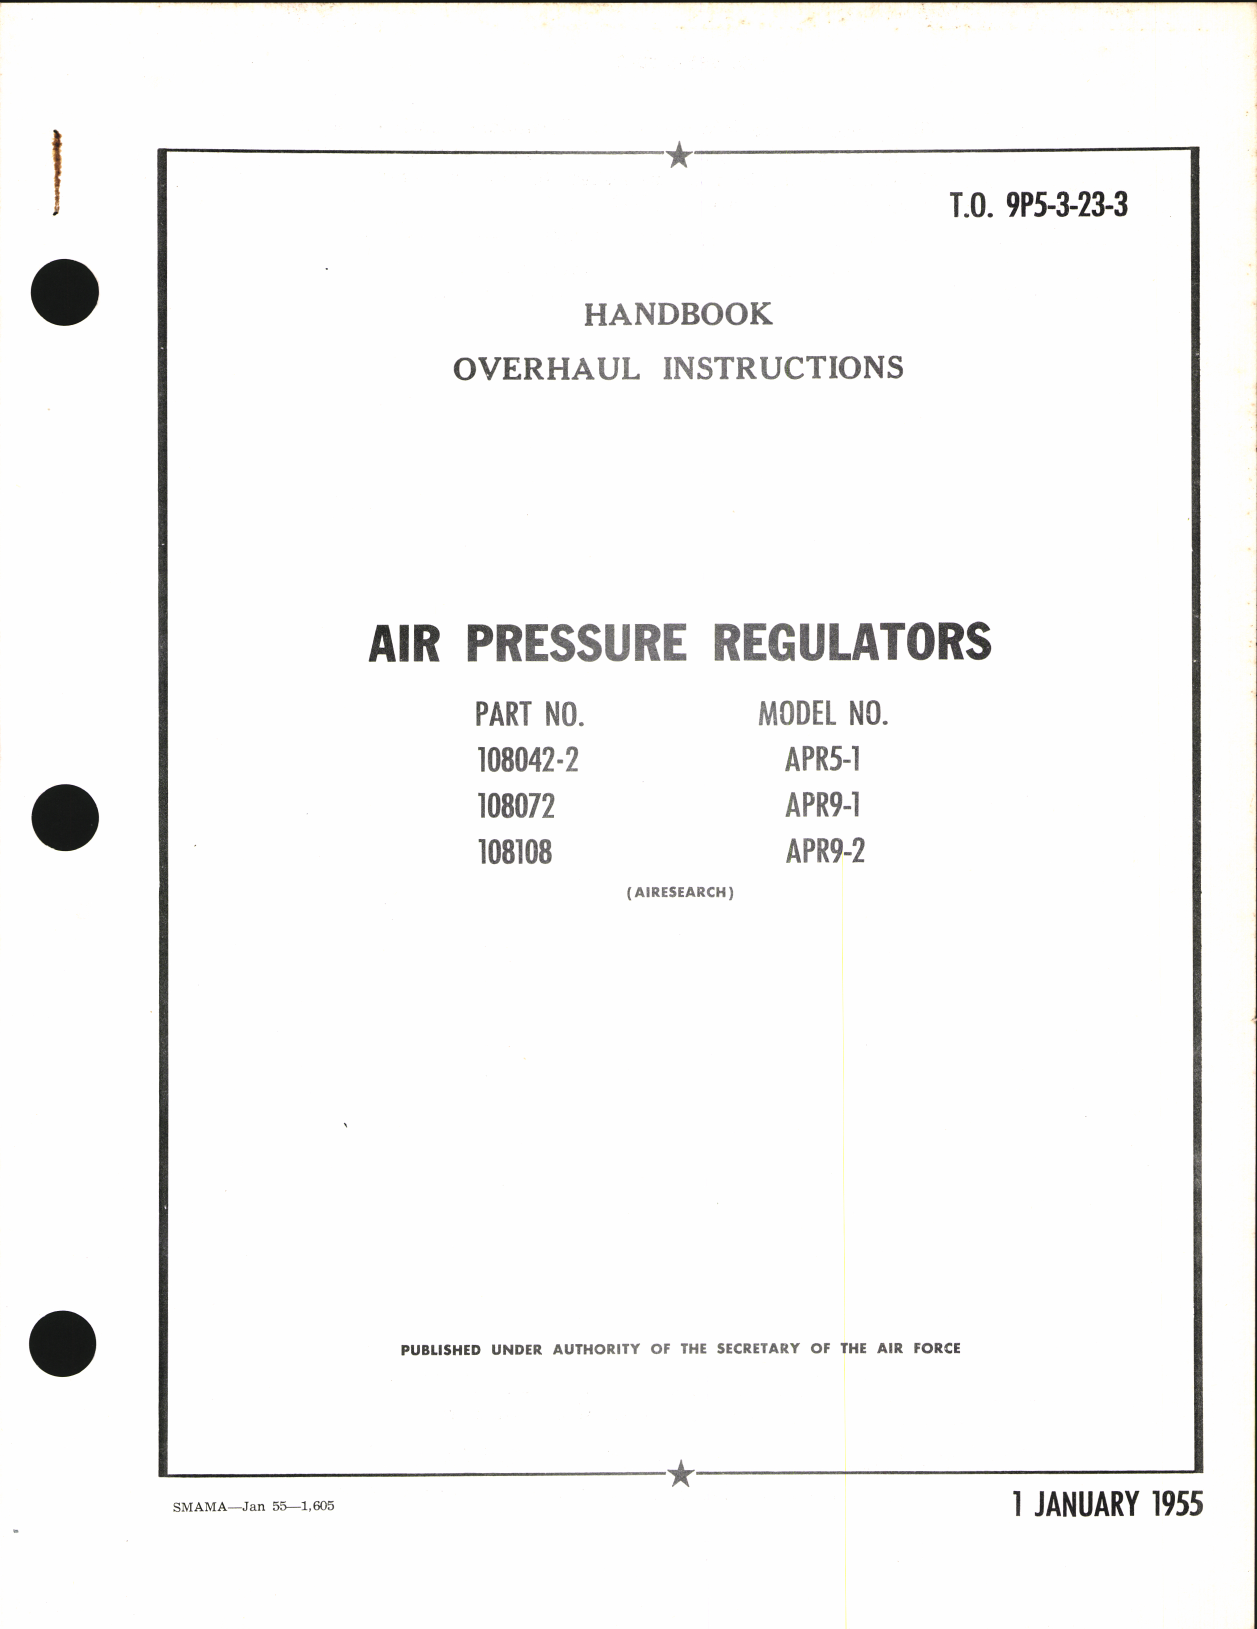 Sample page 1 from AirCorps Library document: Handbook of Overhaul Instructions for Air Pressure Regulators 